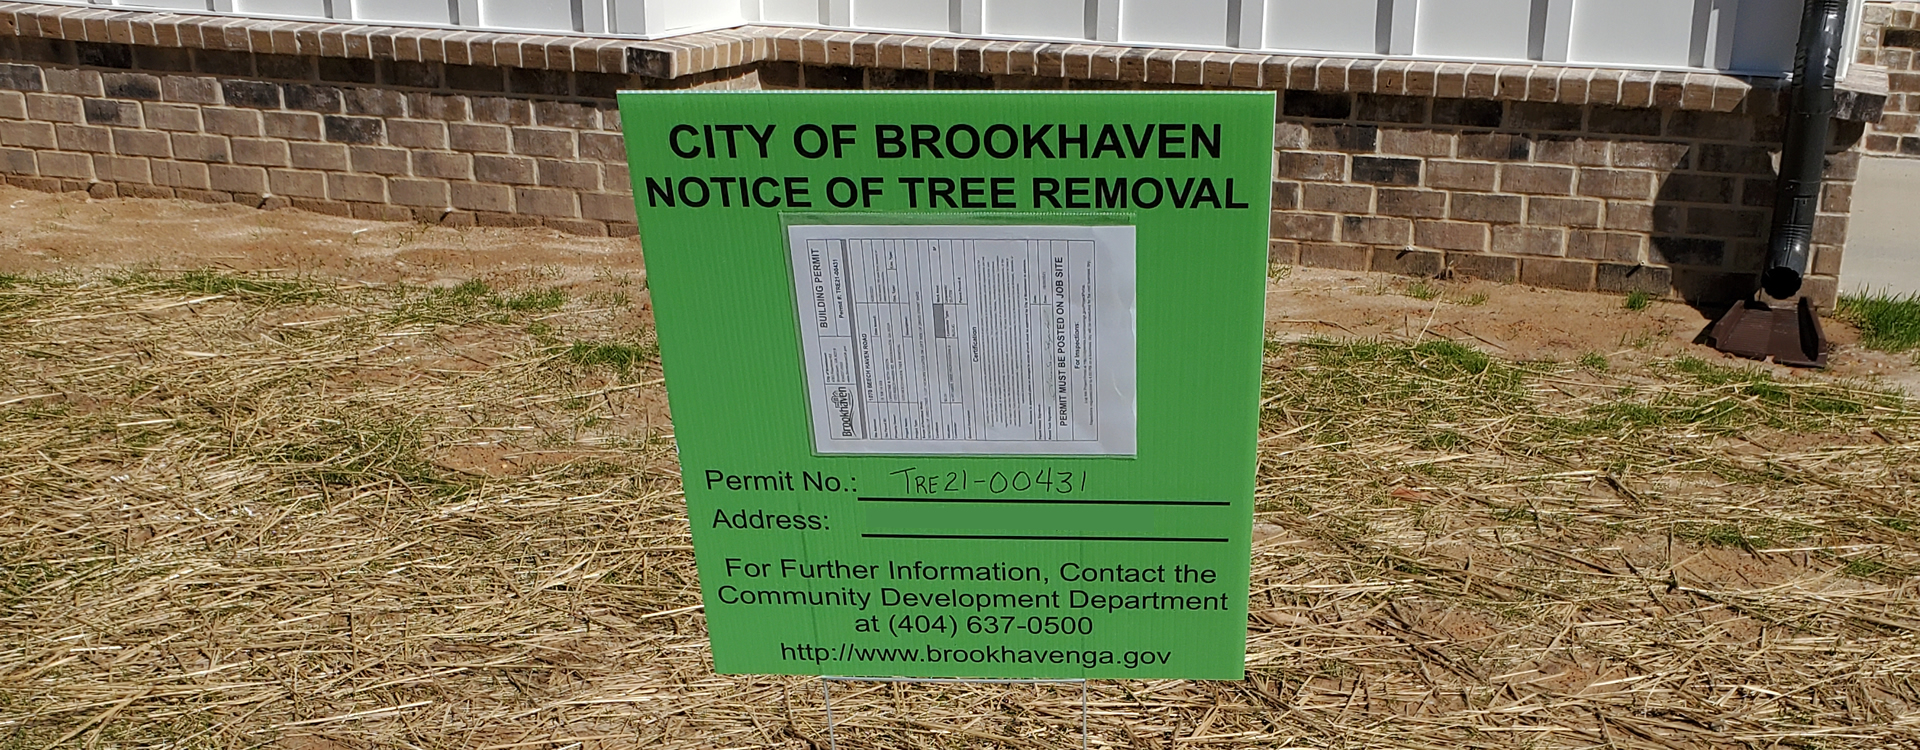 Brookhaven Tree Removal Sign